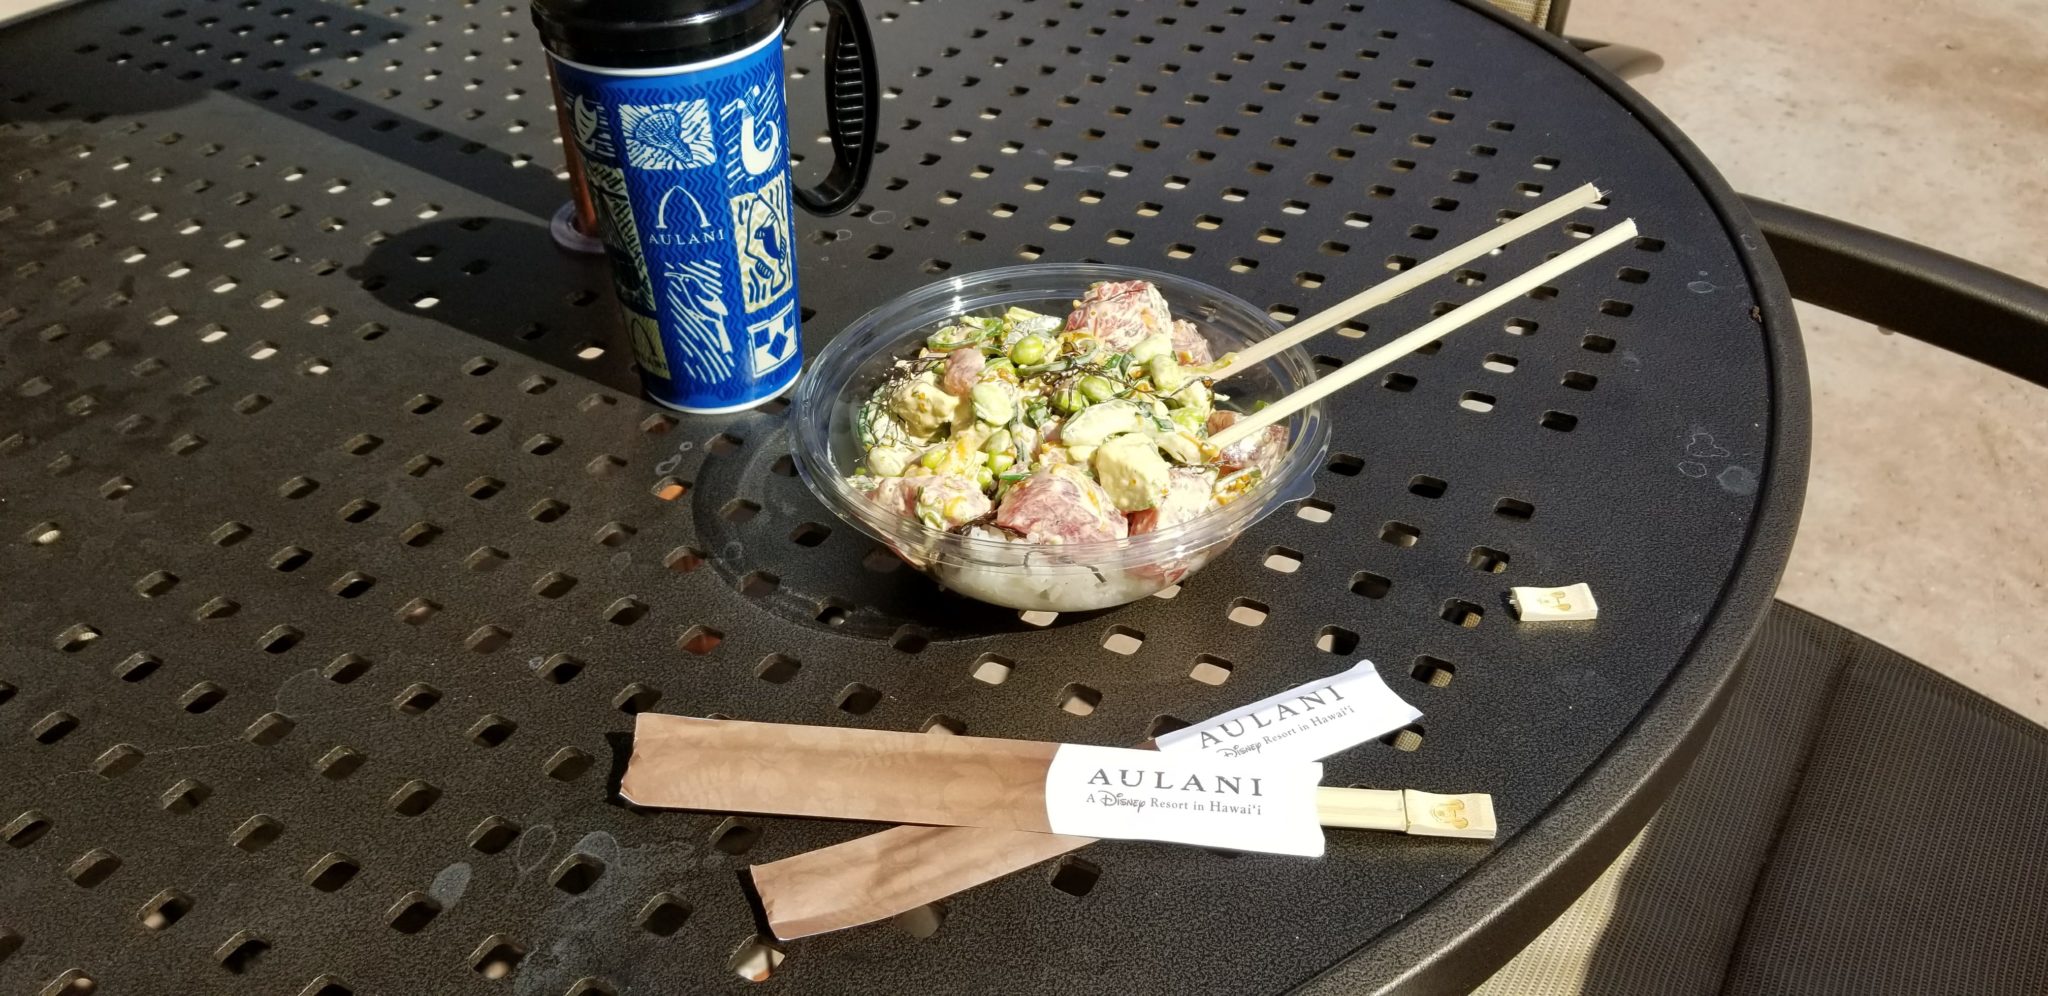 Build Your Own Poke Bowl at Disney’s Aulani Resort in Hawaii